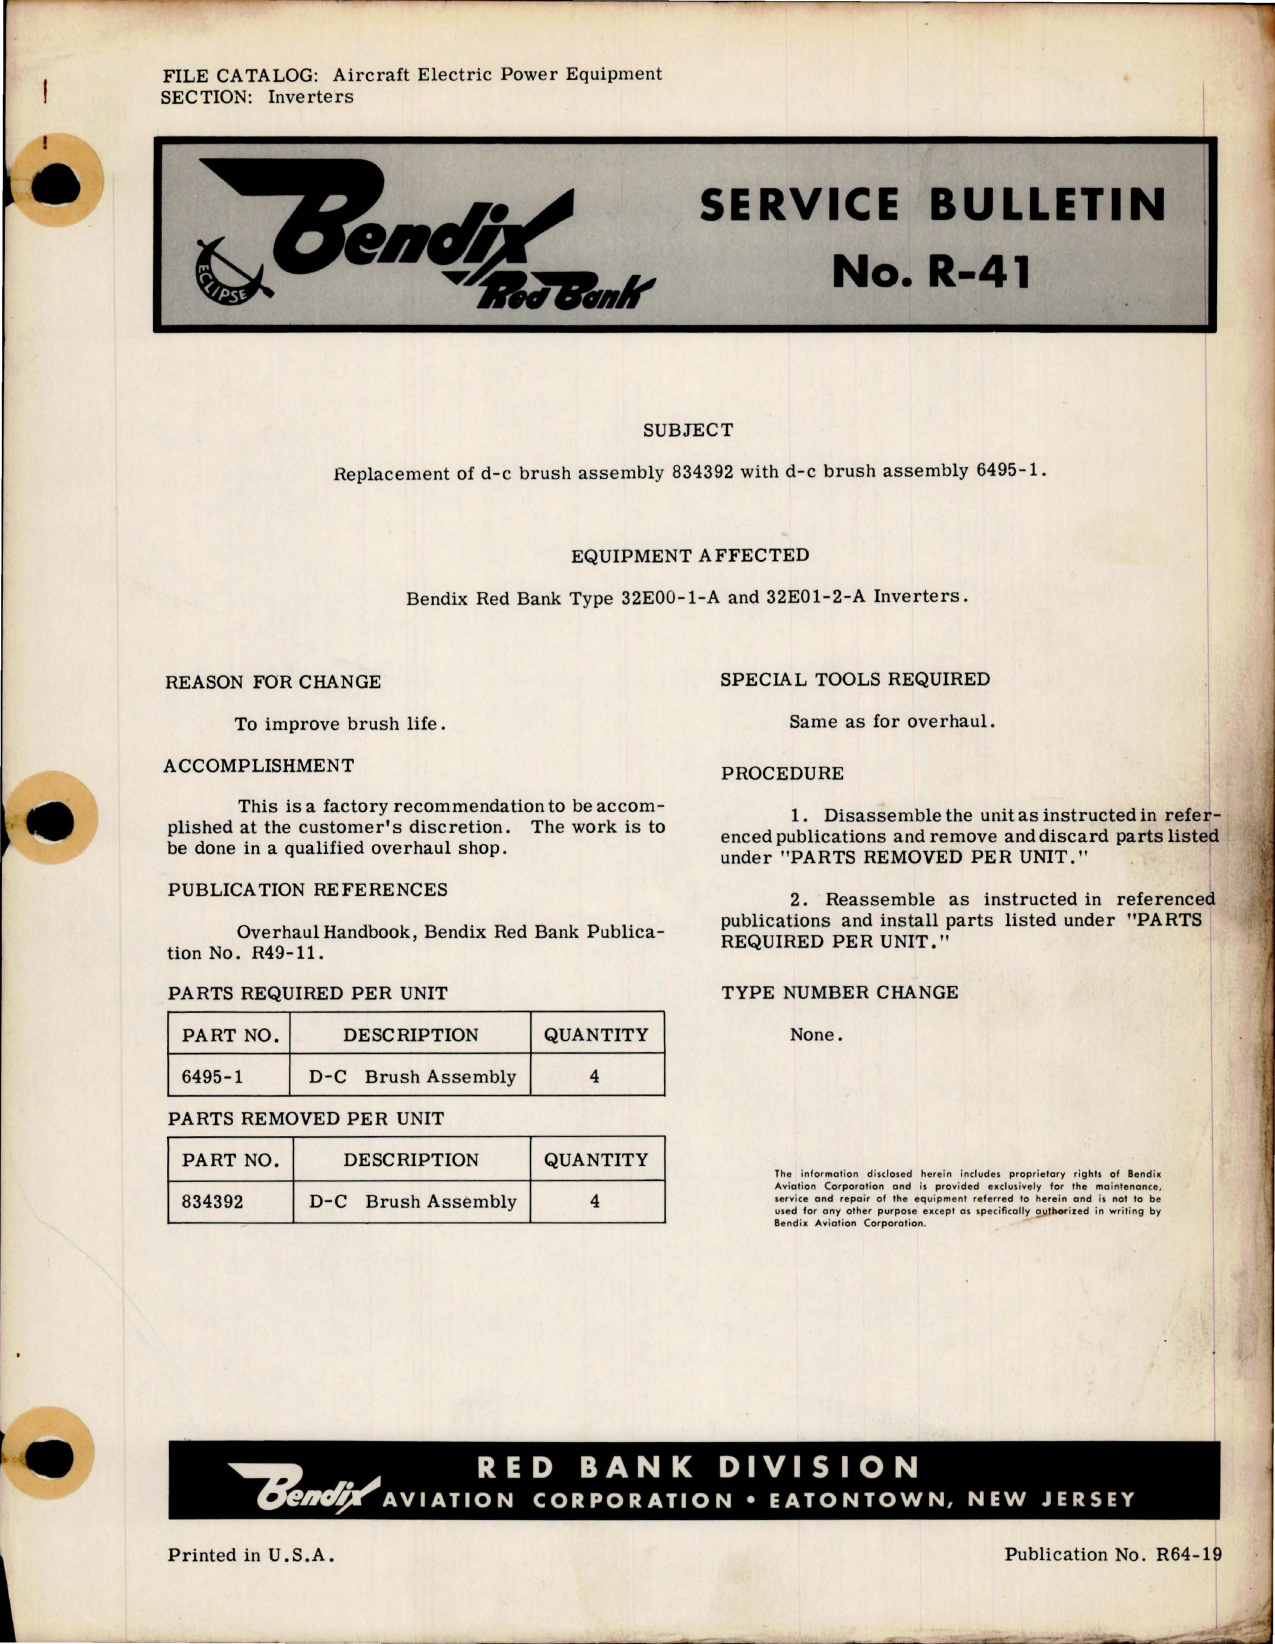 Sample page 1 from AirCorps Library document: Service Bulletin No. R-41, Replacement of D-C brush Assembly 834392 with DC Brush Assembly 6495-1 